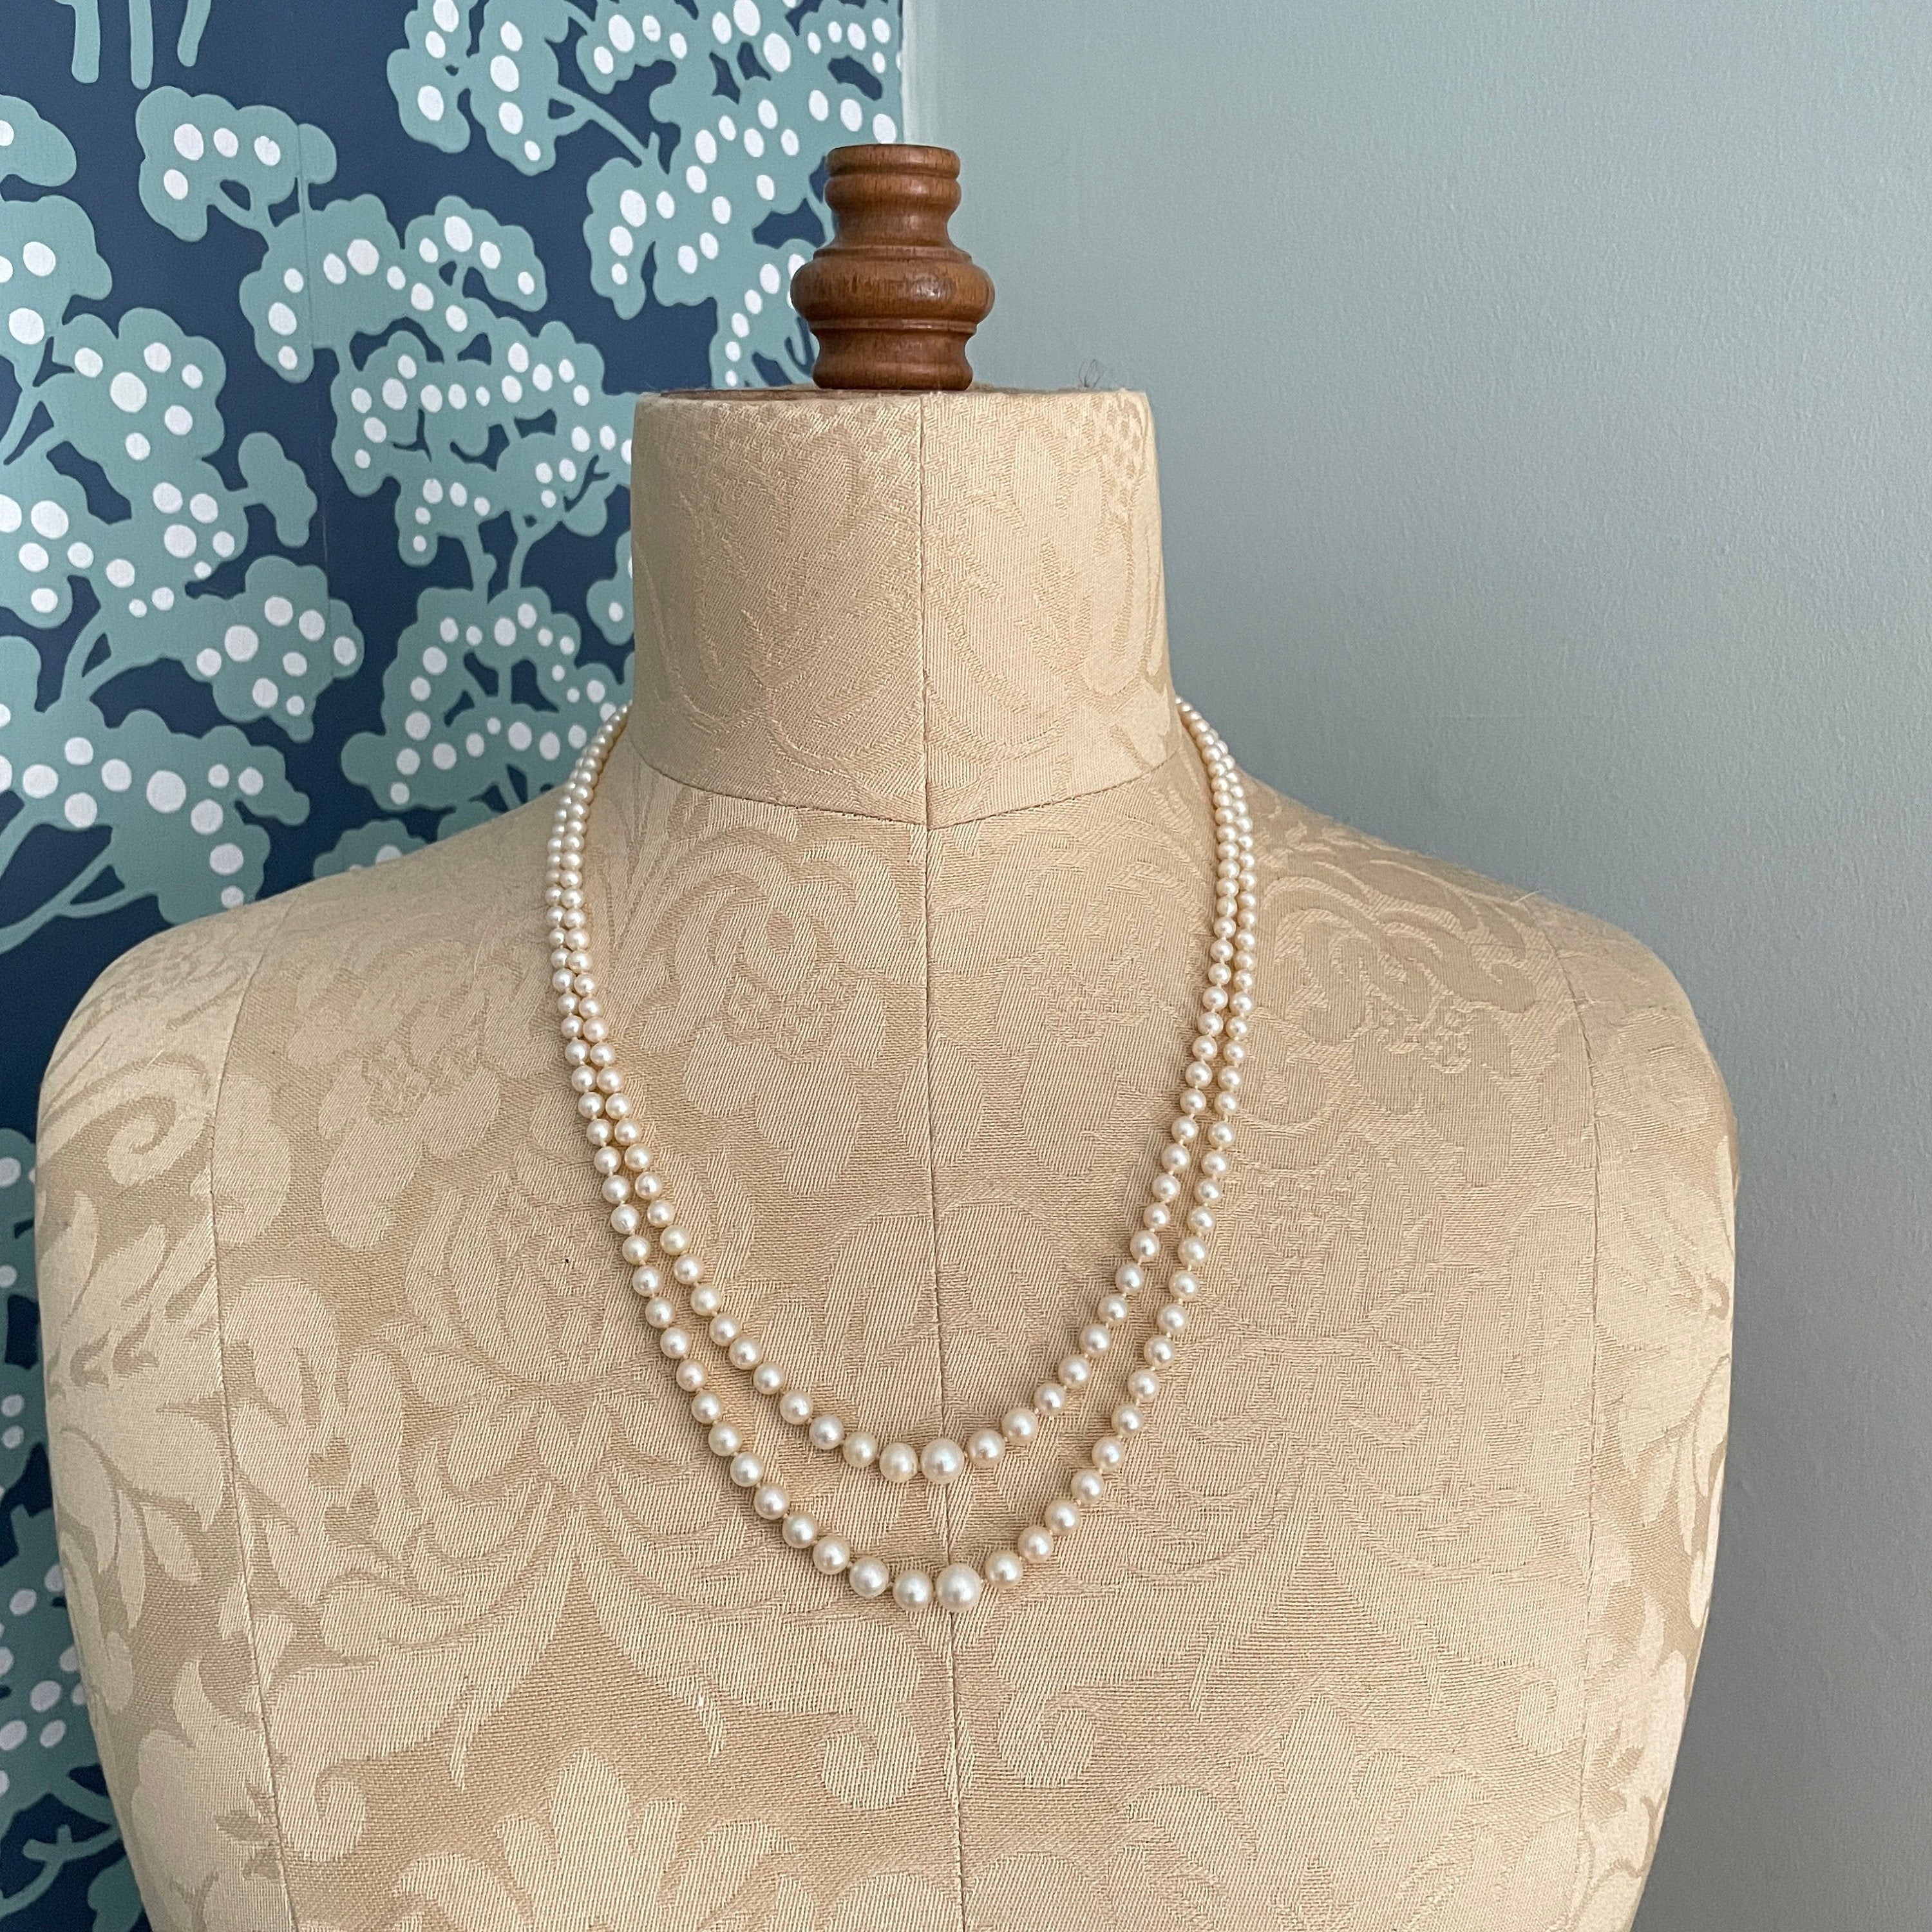 Art deco,  long cultured pearls necklace, double strand with 9ct gold clasp, diamond chip